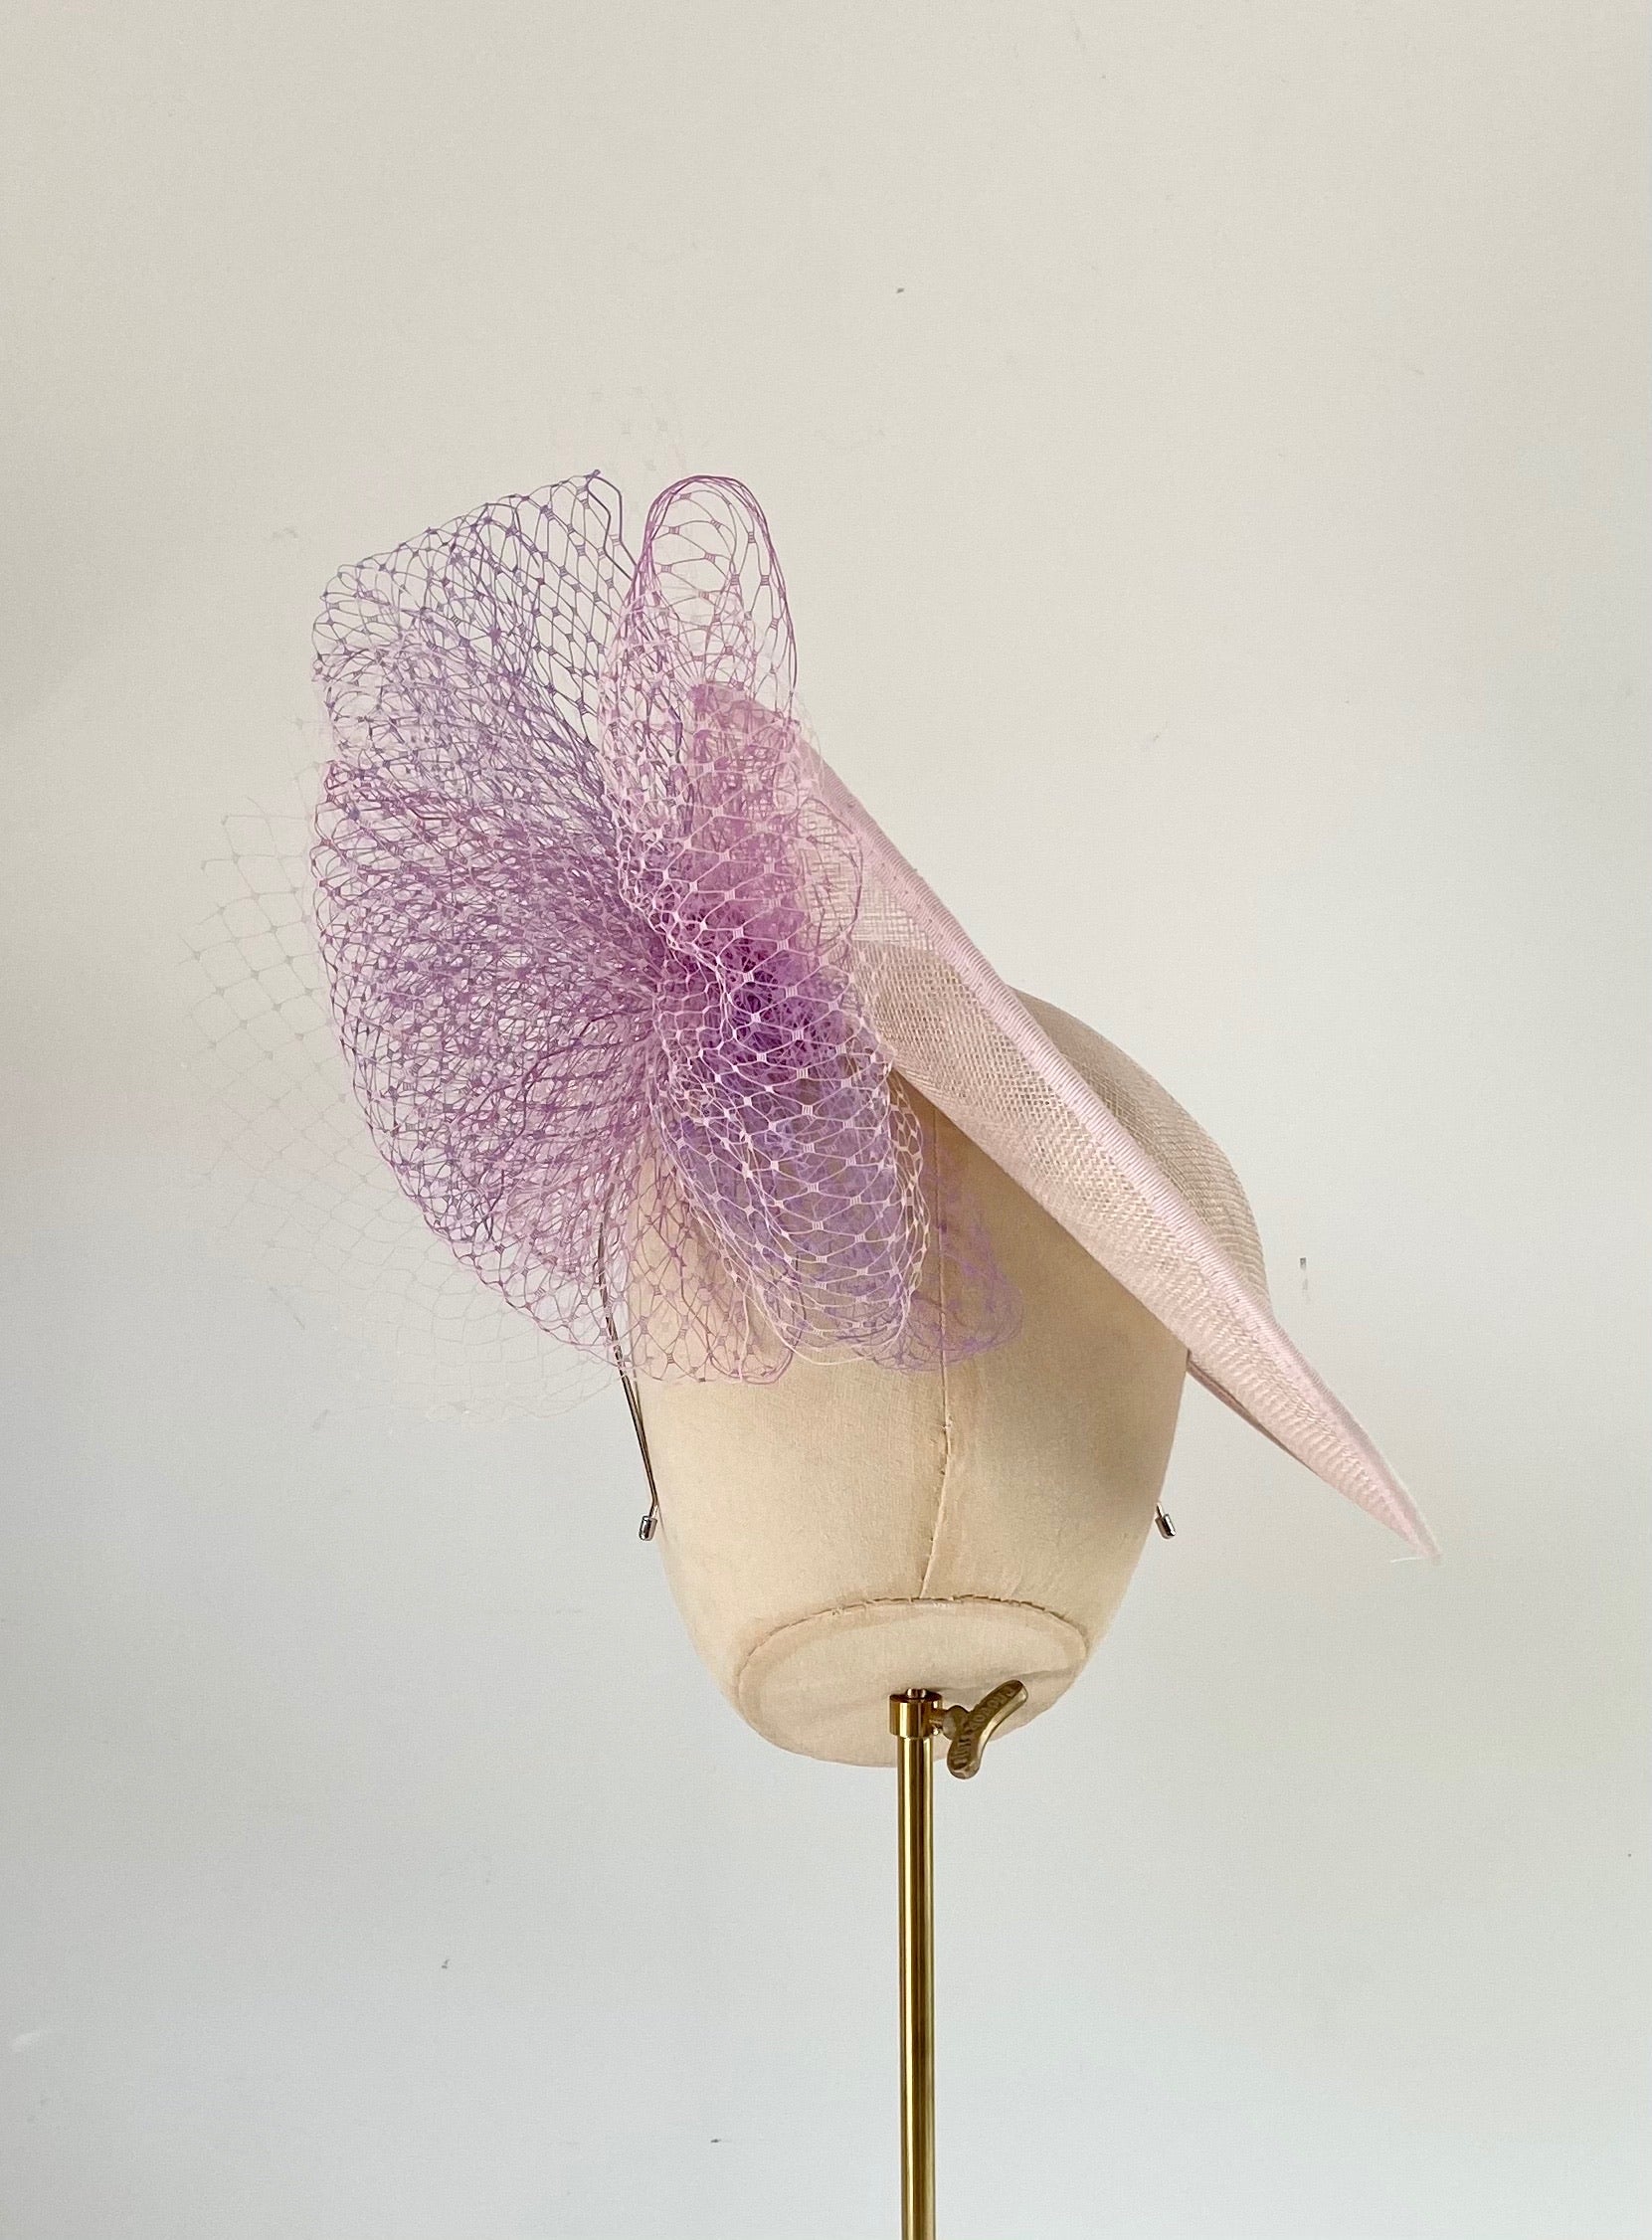 soft pink disc hat with mauve lavender veiling